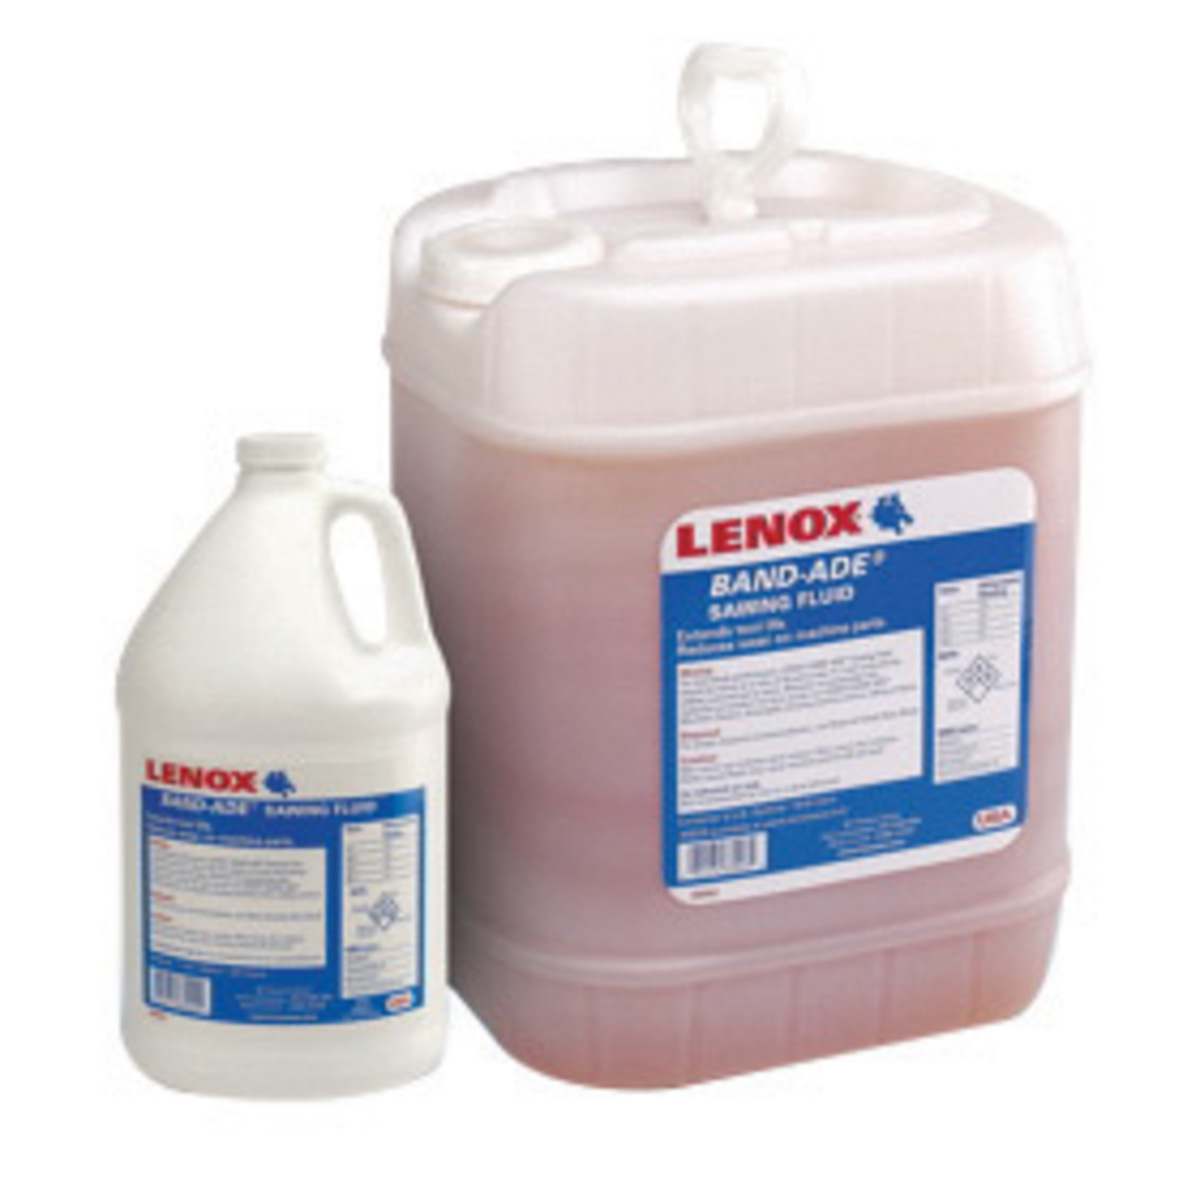 Classic 100 Gel Flux - 1 gal (Case of 4 gallons)